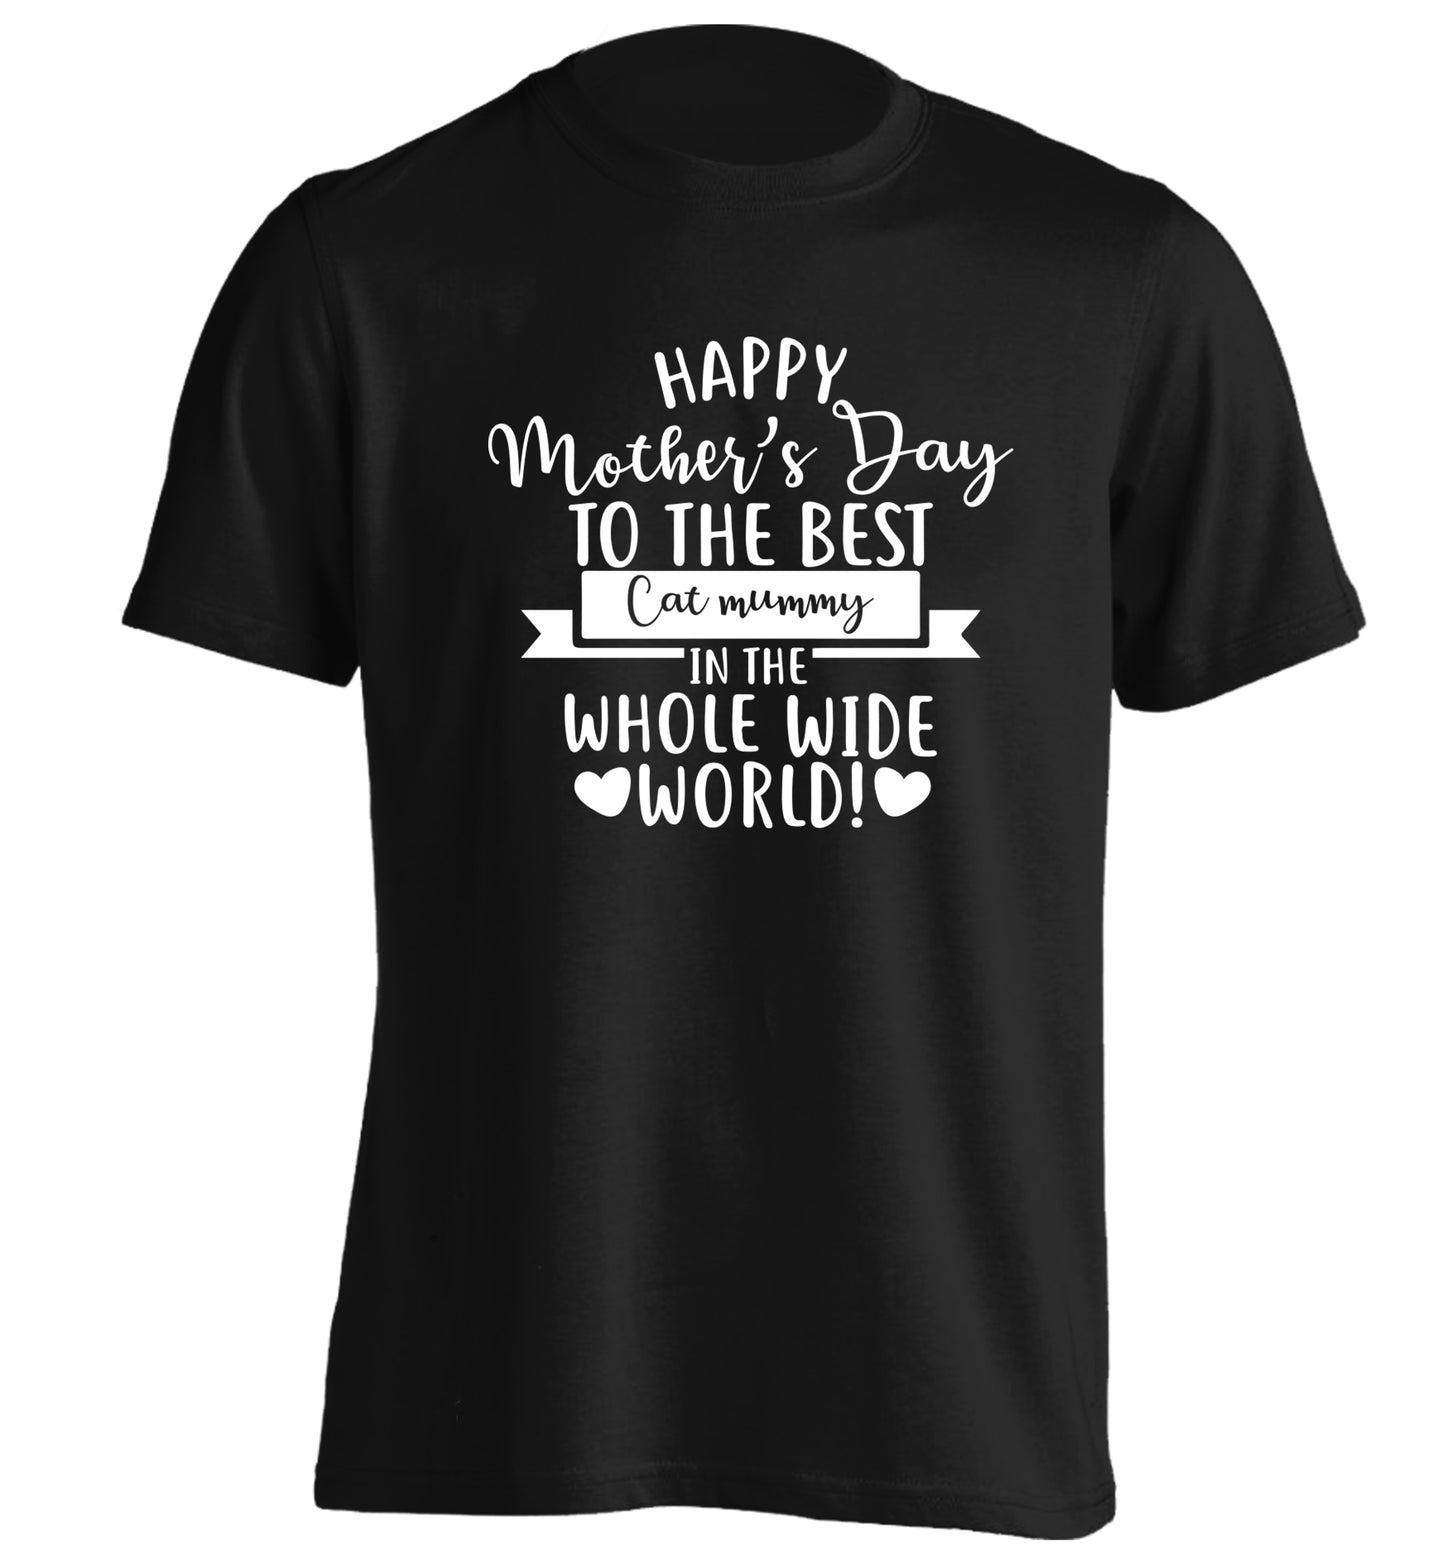 Happy mother's day to the best cat mummy in the world adults unisex black Tshirt 2XL